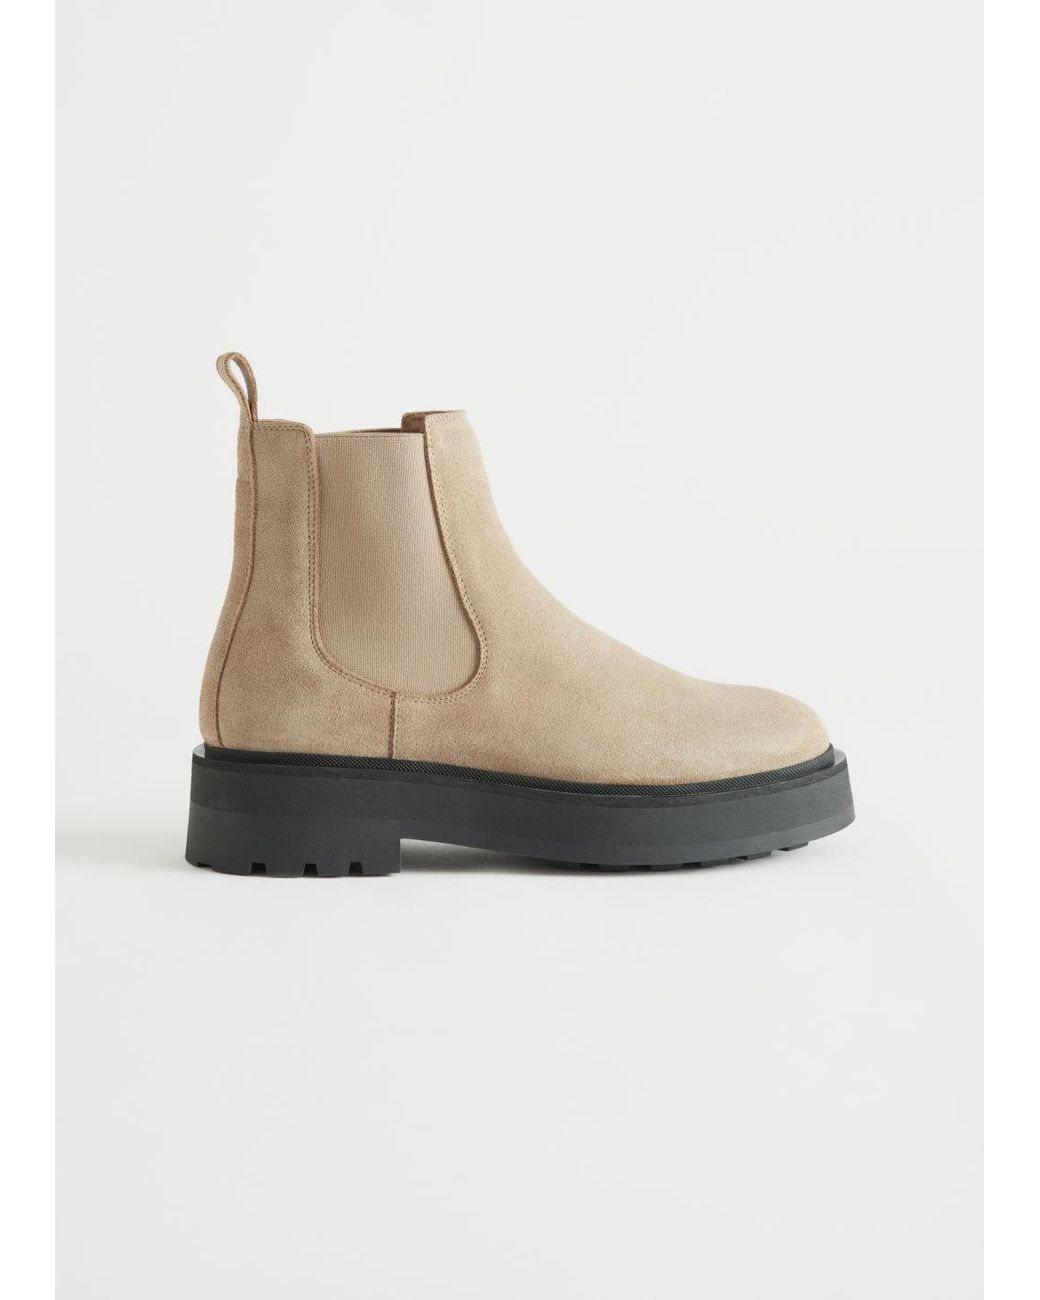 & Other Stories Chunky Chelsea Suede Boots in Beige (Natural) - Lyst